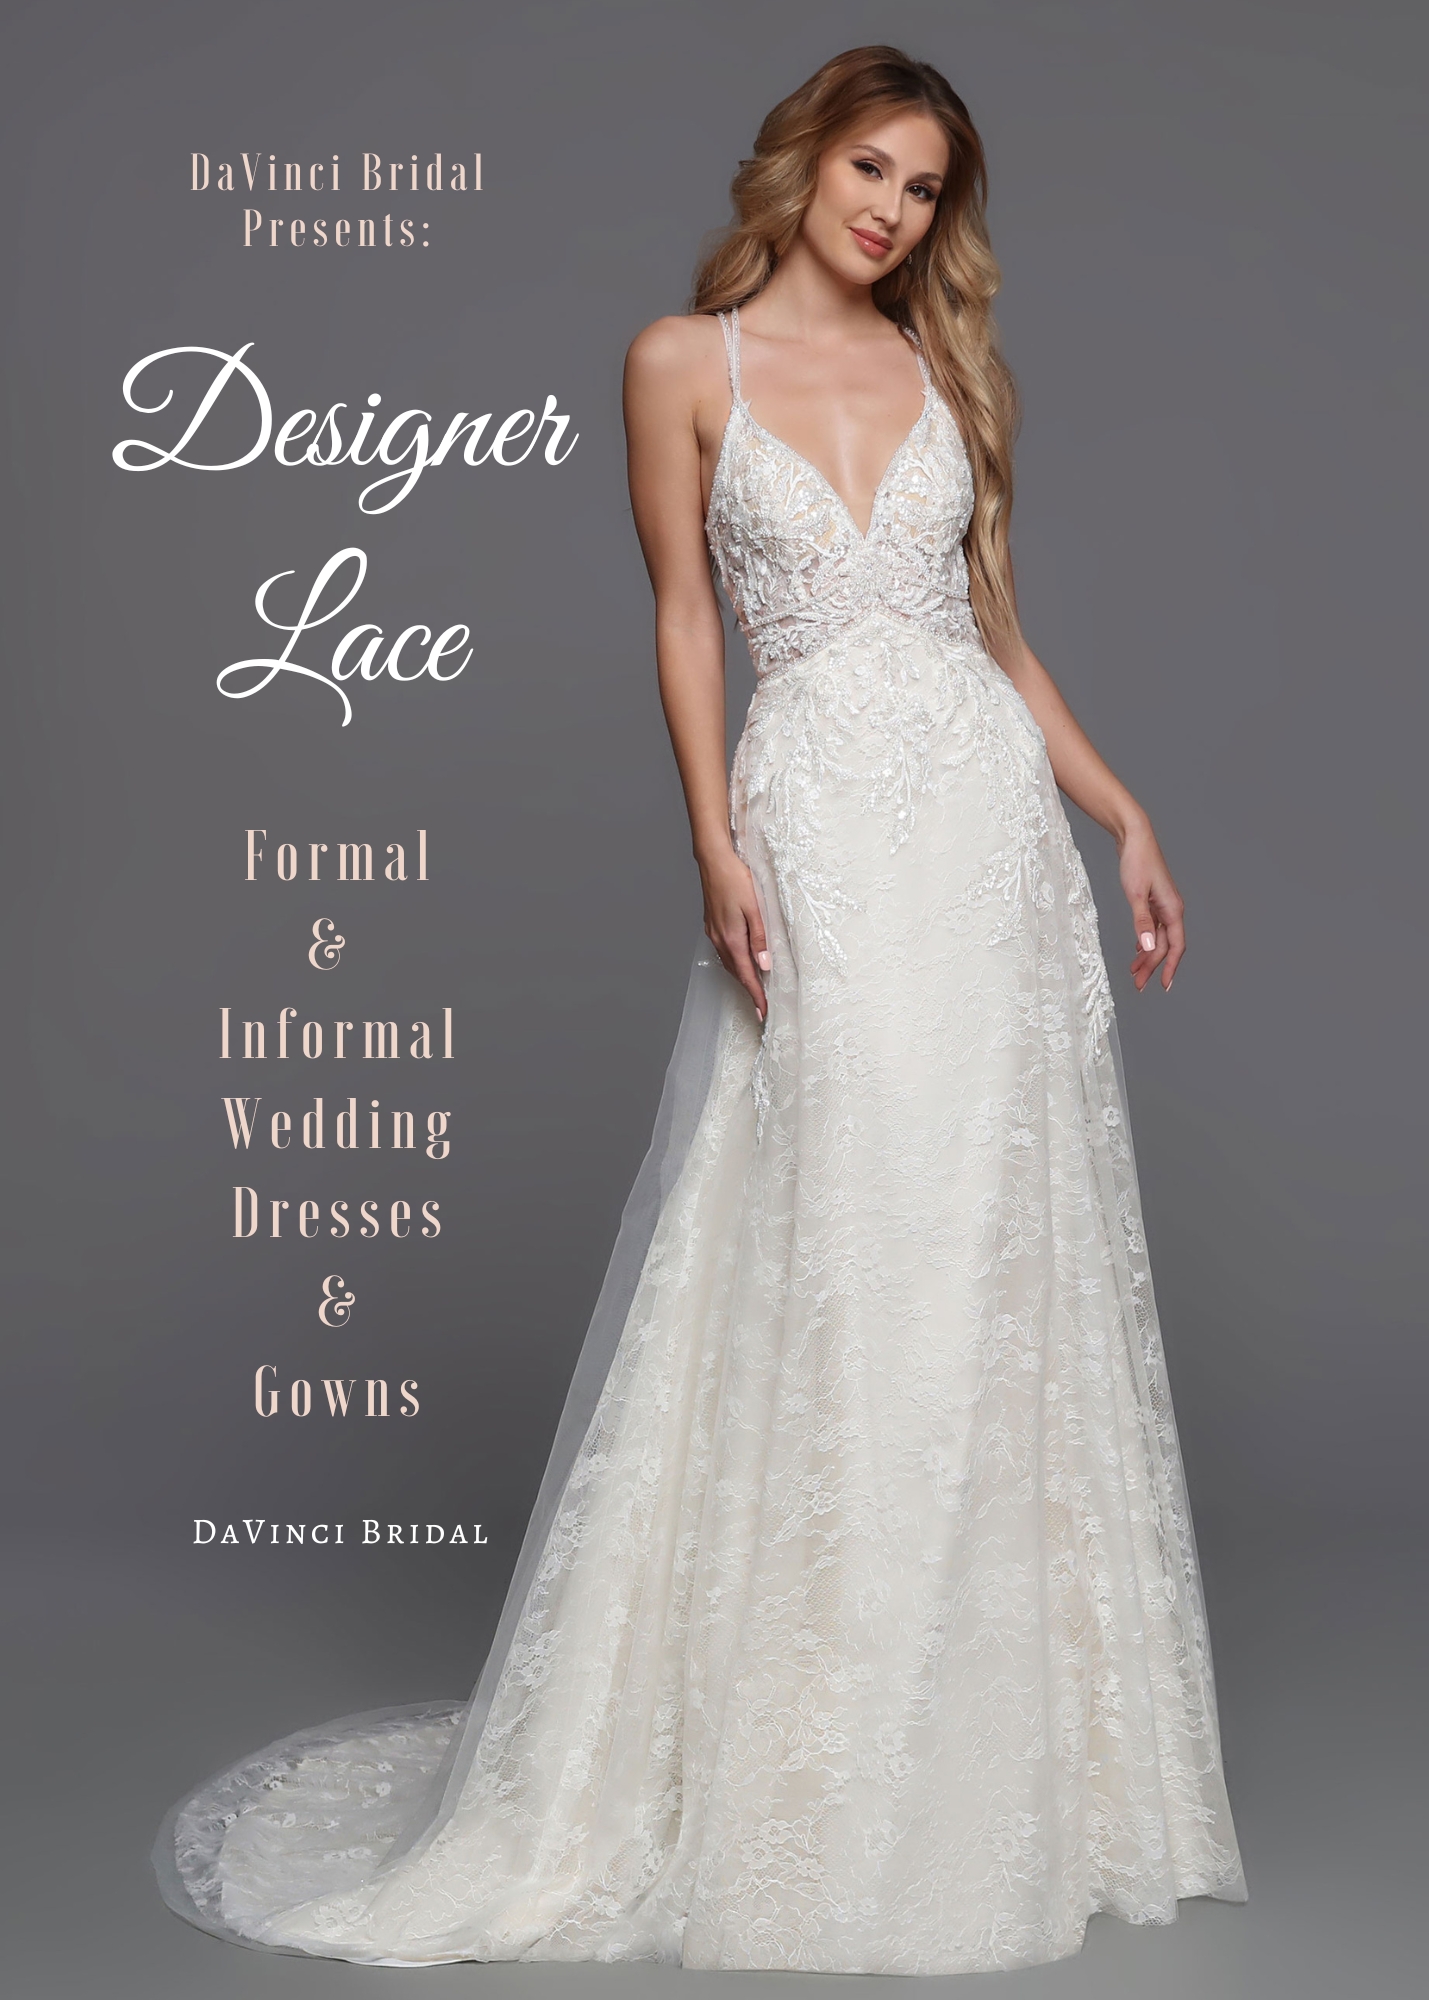 Couture Design Lace: For Wedding Dresses - Bridal Fabrics